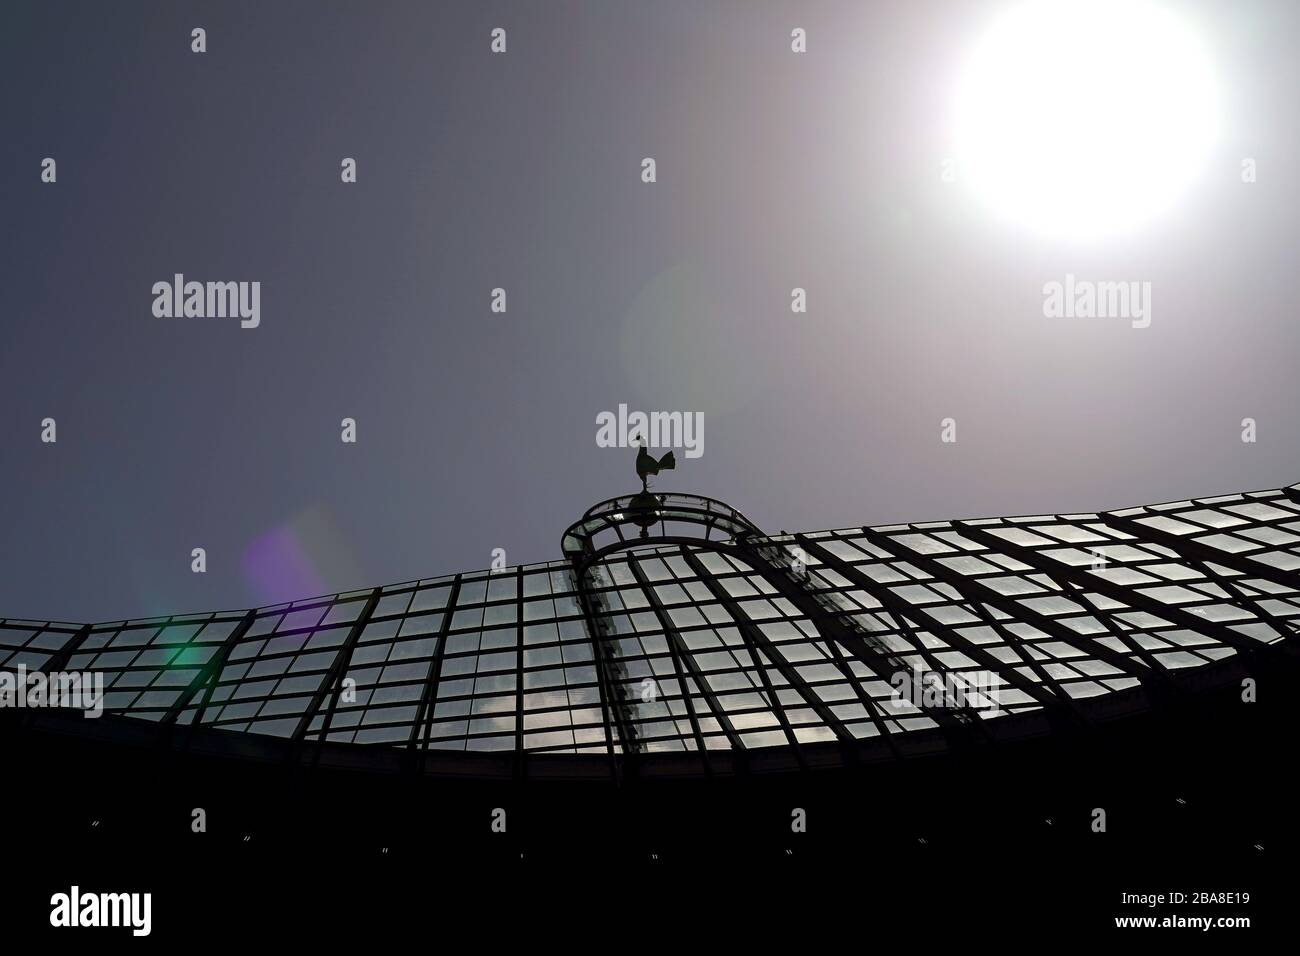 A general view of Tottenham Hotspur Stadium ahead of the match Stock Photo